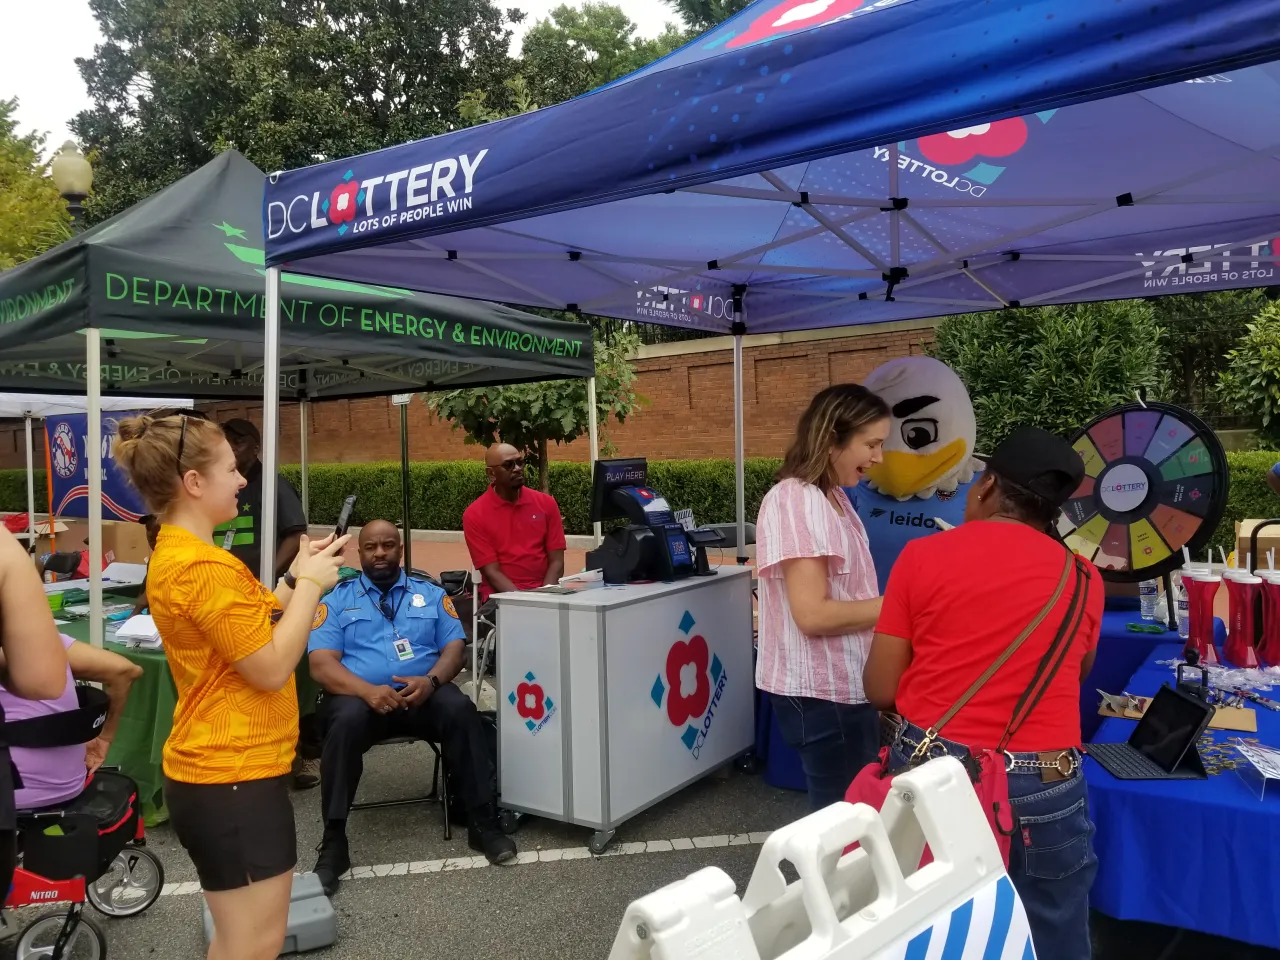 Player's at the DC Lottery tent